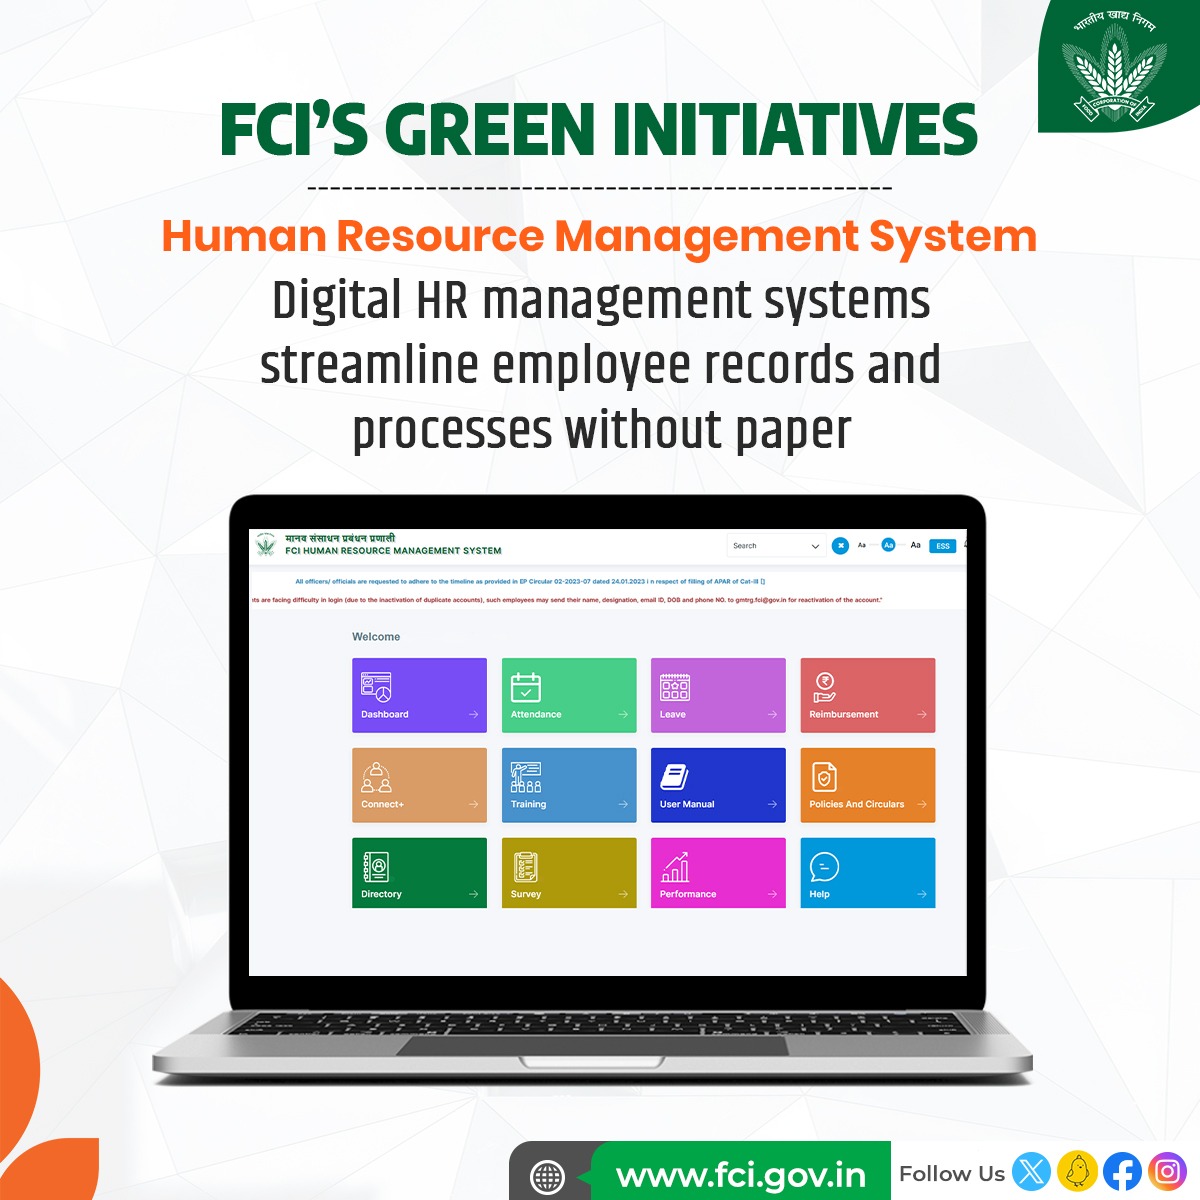 FCI utilizes digital HR management systems to streamline employee records and processes, thus reducing the need for and wastage of paper. #GreenIndia #PaperlessIndia